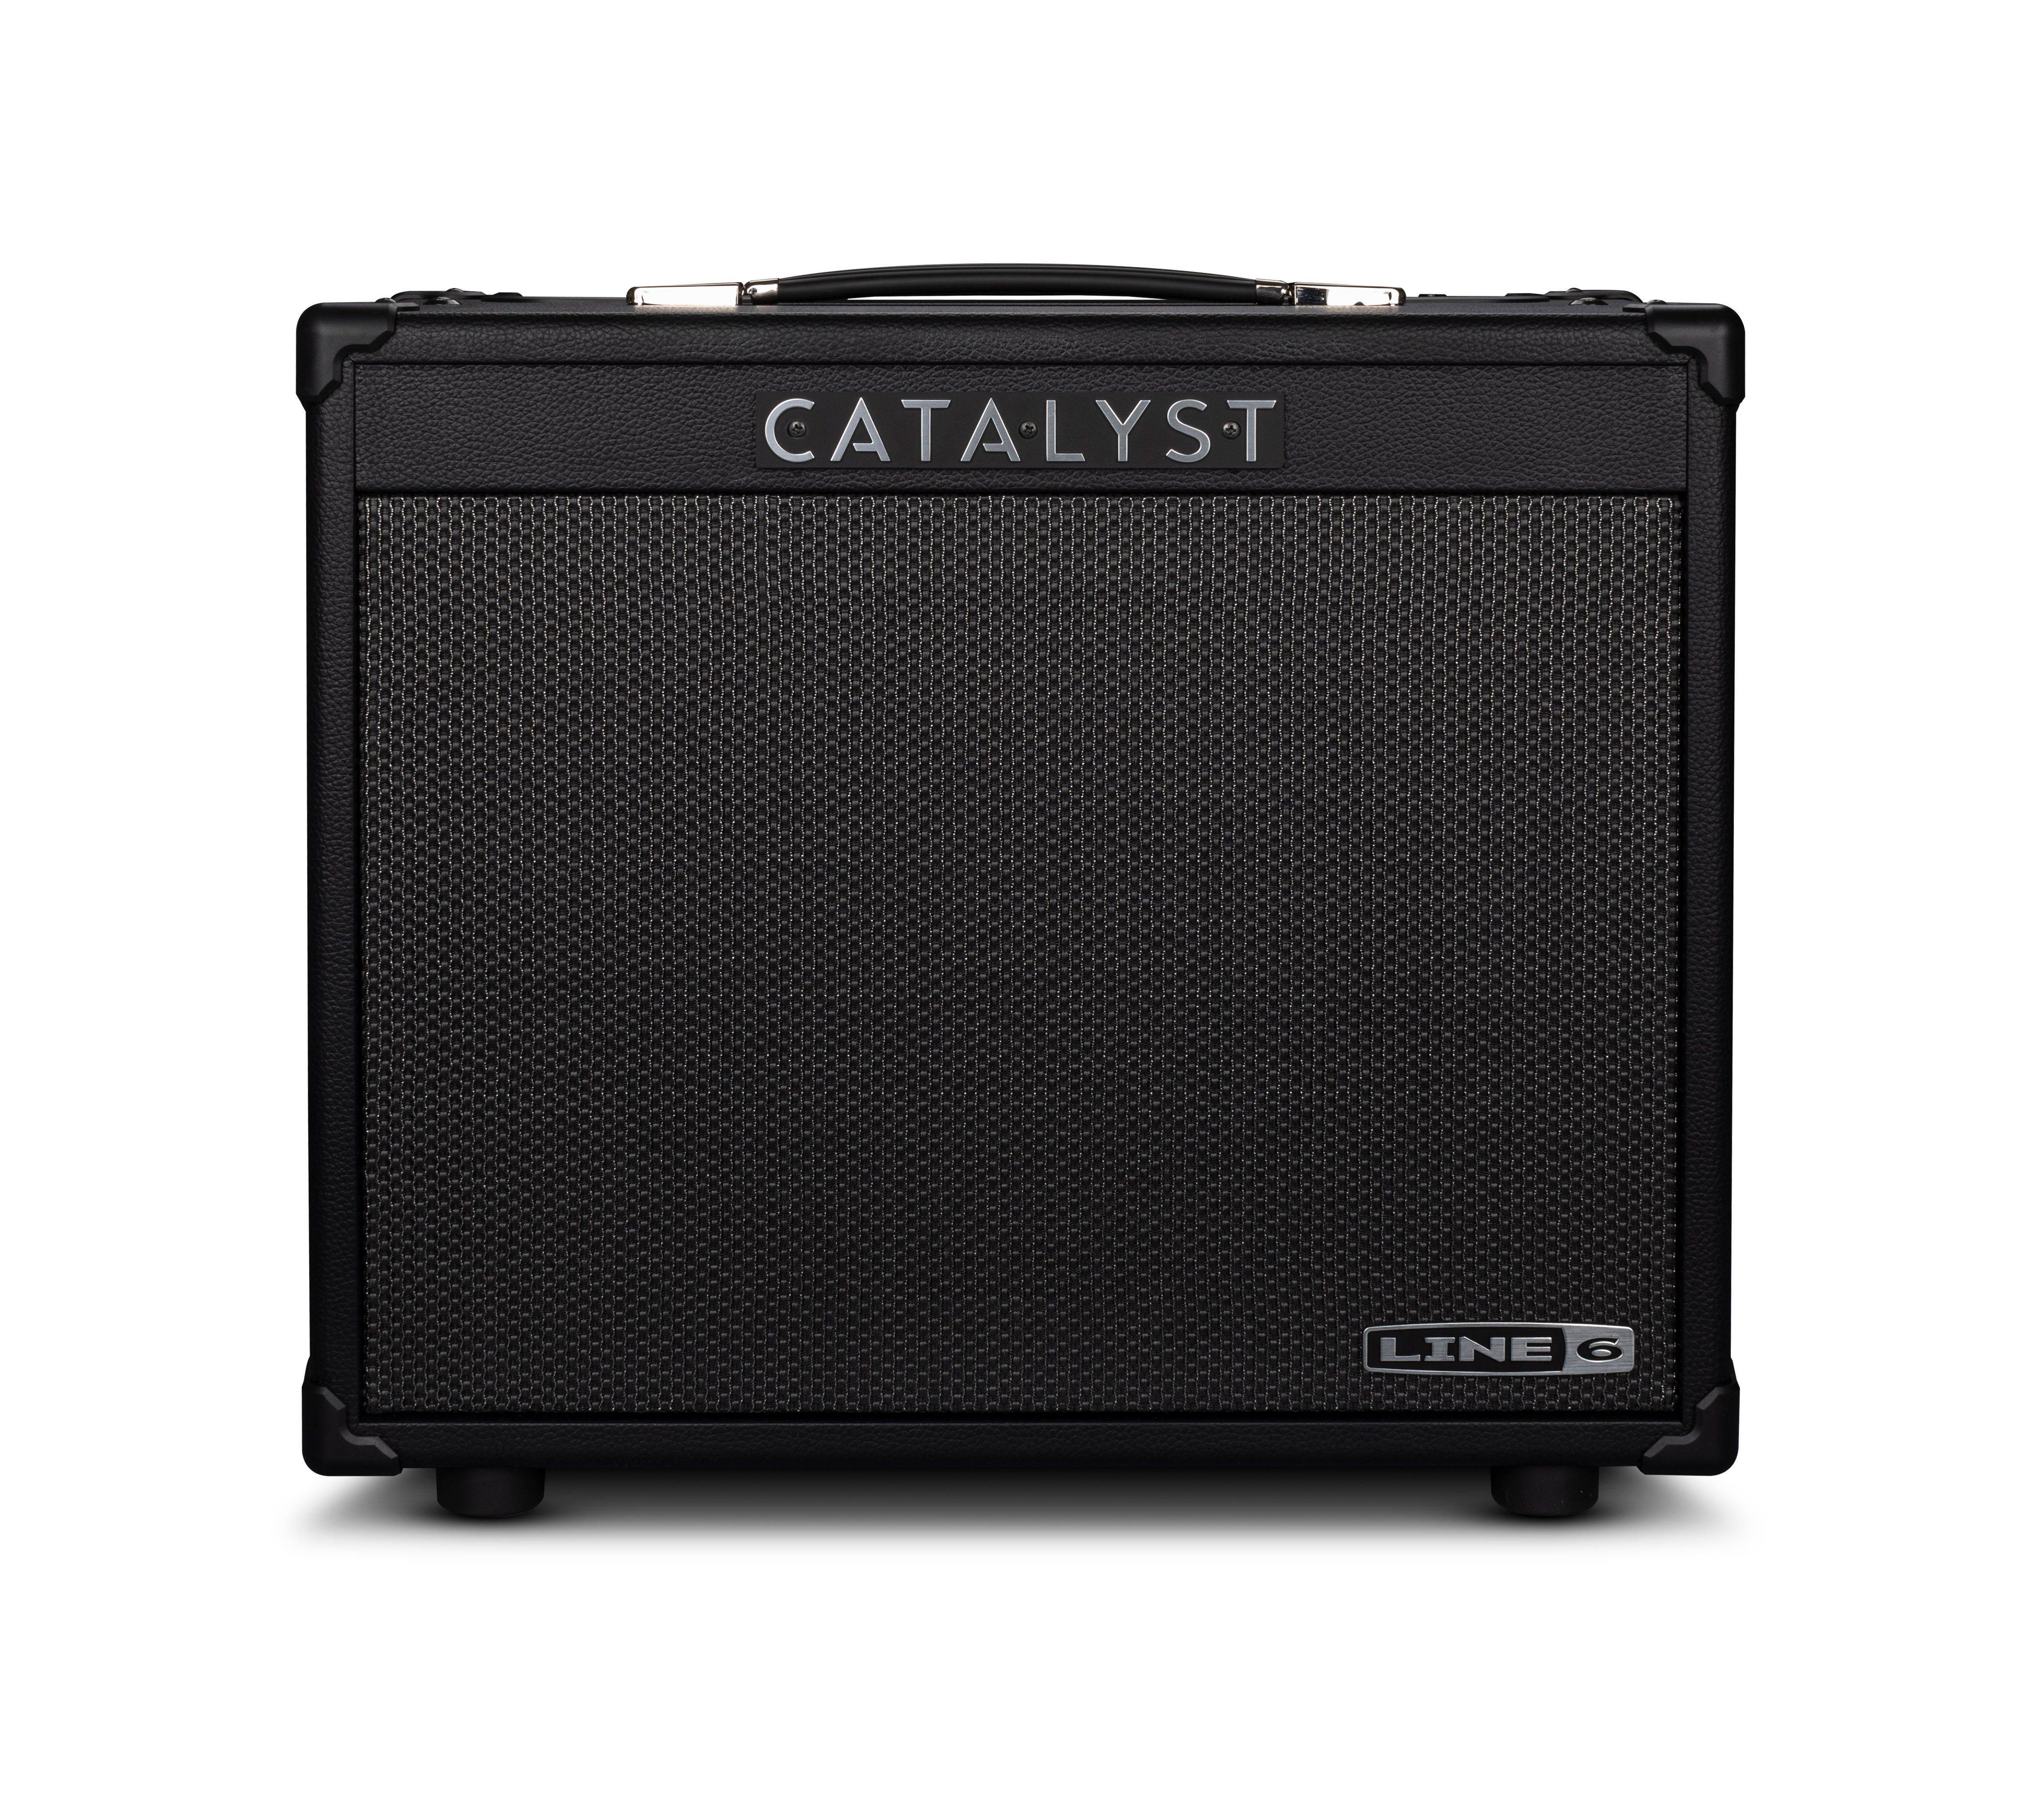 Line 6 Catalyst Combo 60w 1x12 - Electric guitar combo amp - Variation 1